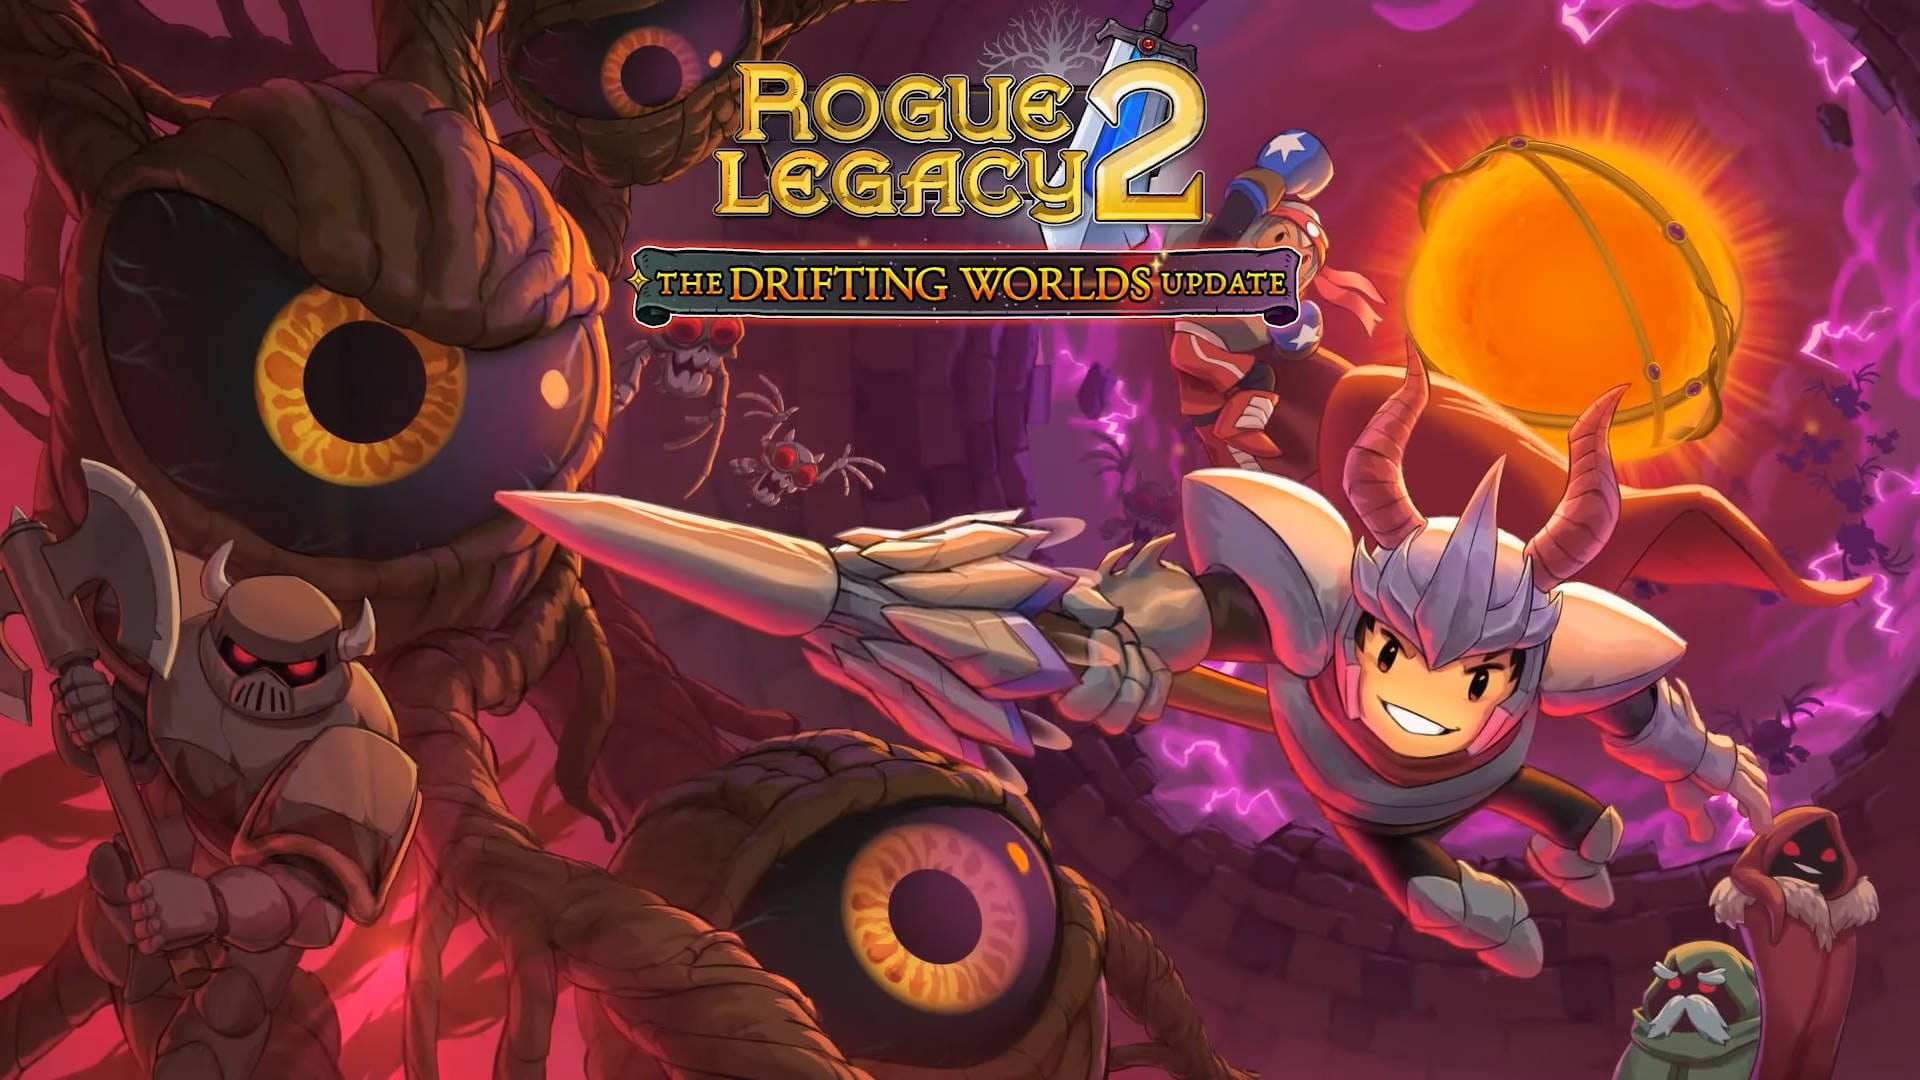 Rogue Legacy 2 Drifting Worlds Update cover